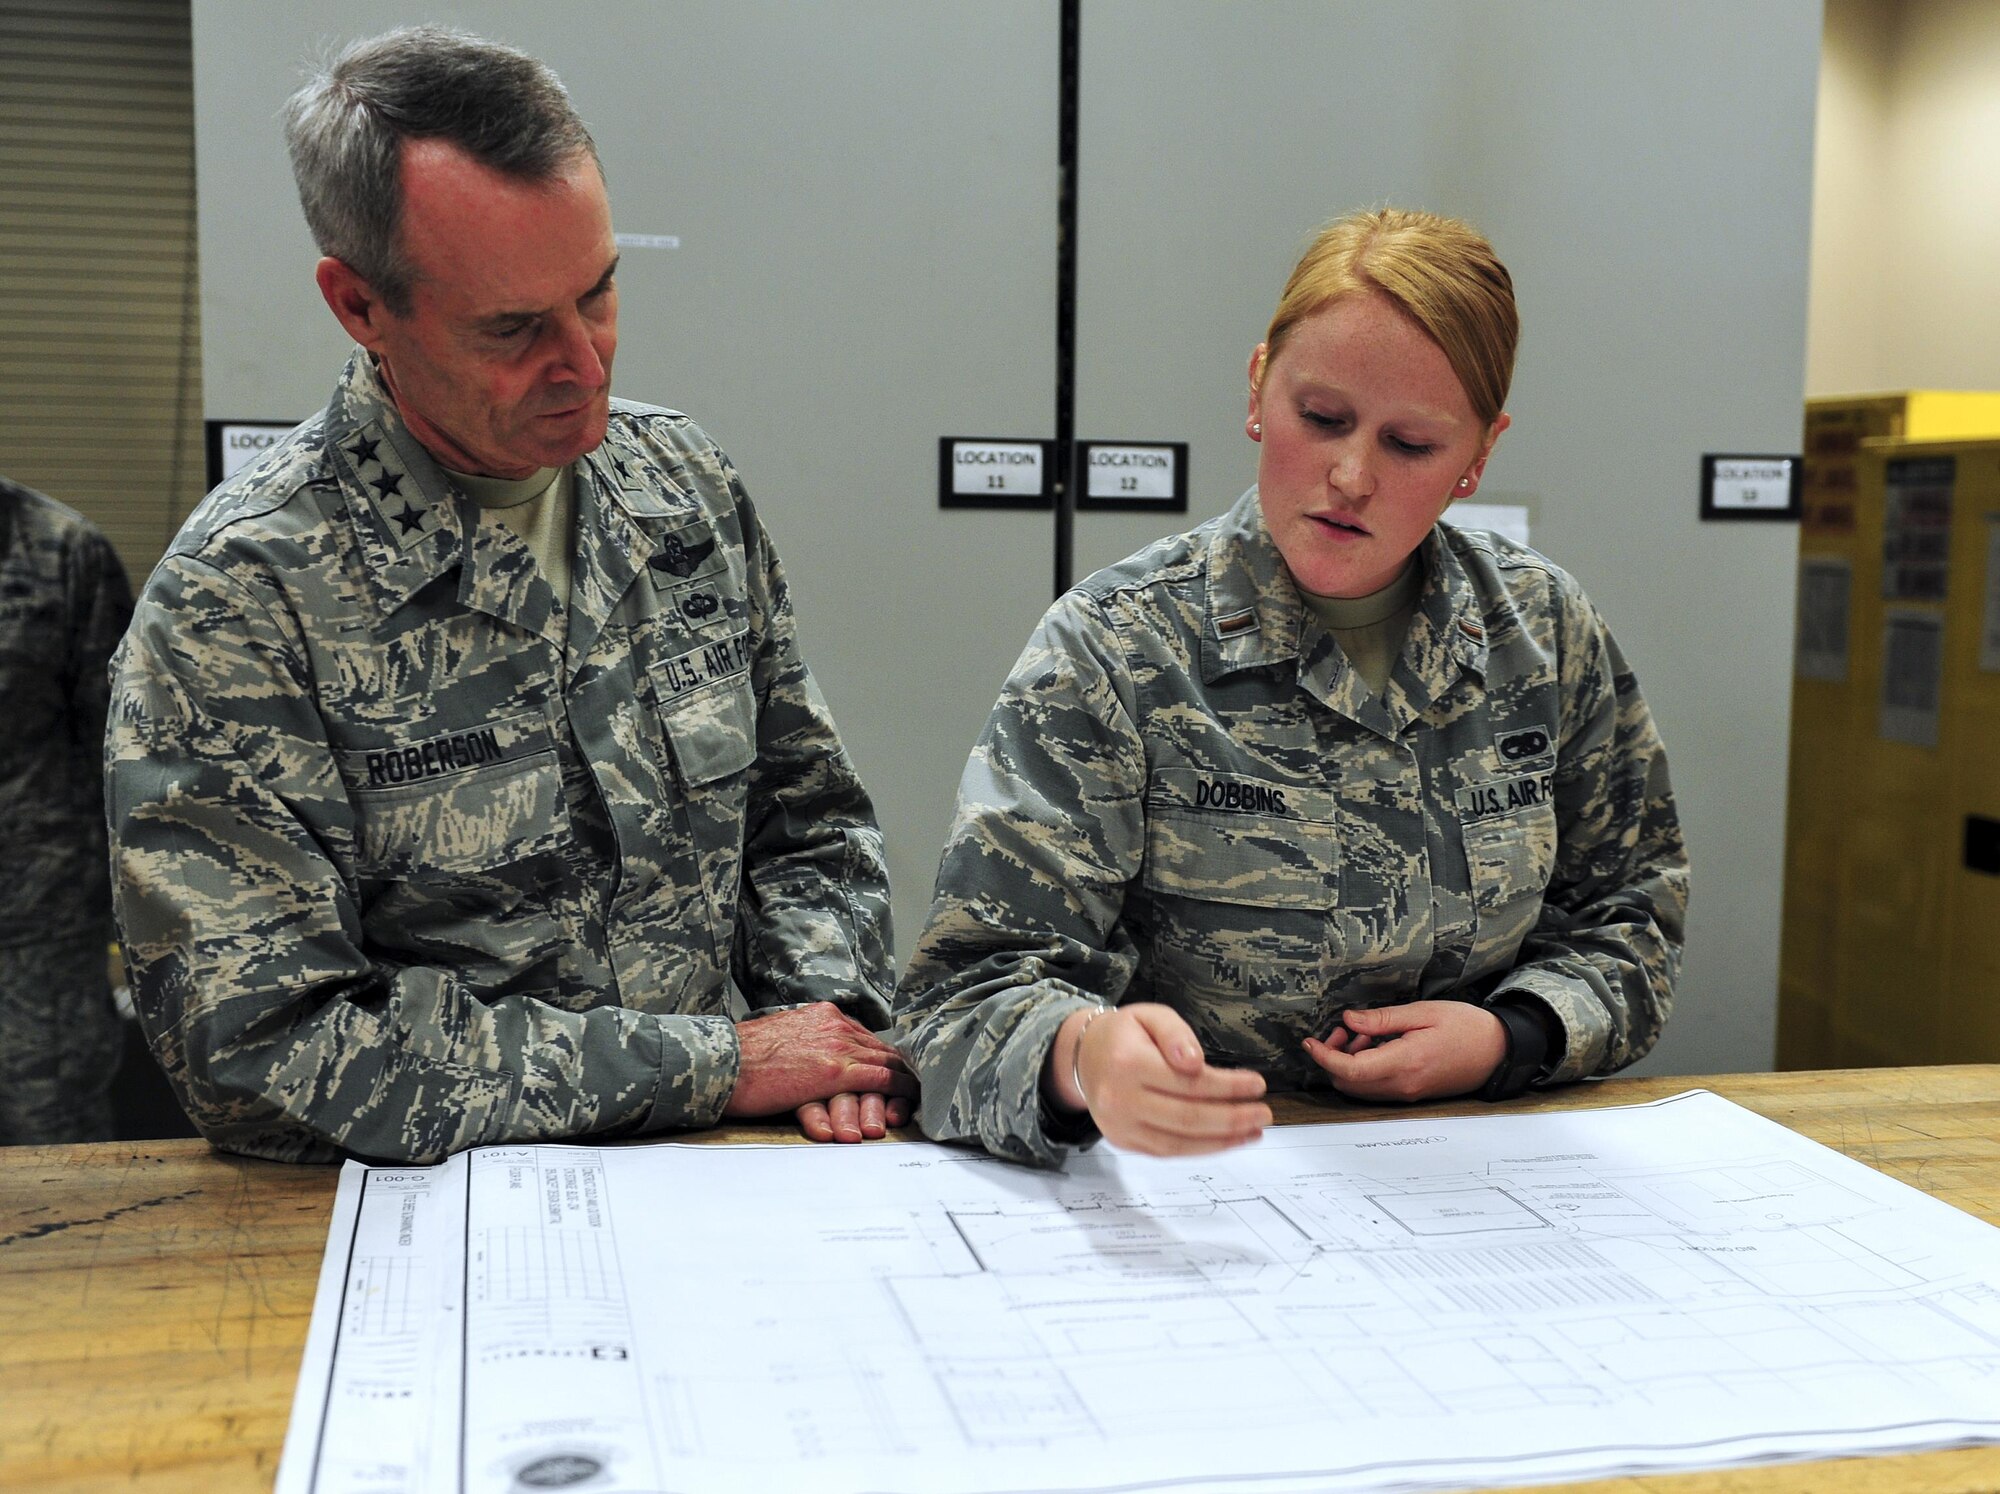 Lt. Gen. Darryl Roberson, commander of Air Education and Training Command, looks over proposed design changes to the 314th Aircraft Maintenance bay with 2nd Lt. Carissa Dobbins, 314th AMXS Sortie Support Flight commander, Aug. 22, 2016, at Little Rock Air Force Base, Ark. Dobbins explained that the expansion would improve storage for equipment and tools as well as provide more room for the maintenance teams to prepare for the day.  (U.S. Air Force photo by Staff Sgt. Jeremy McGuffin)